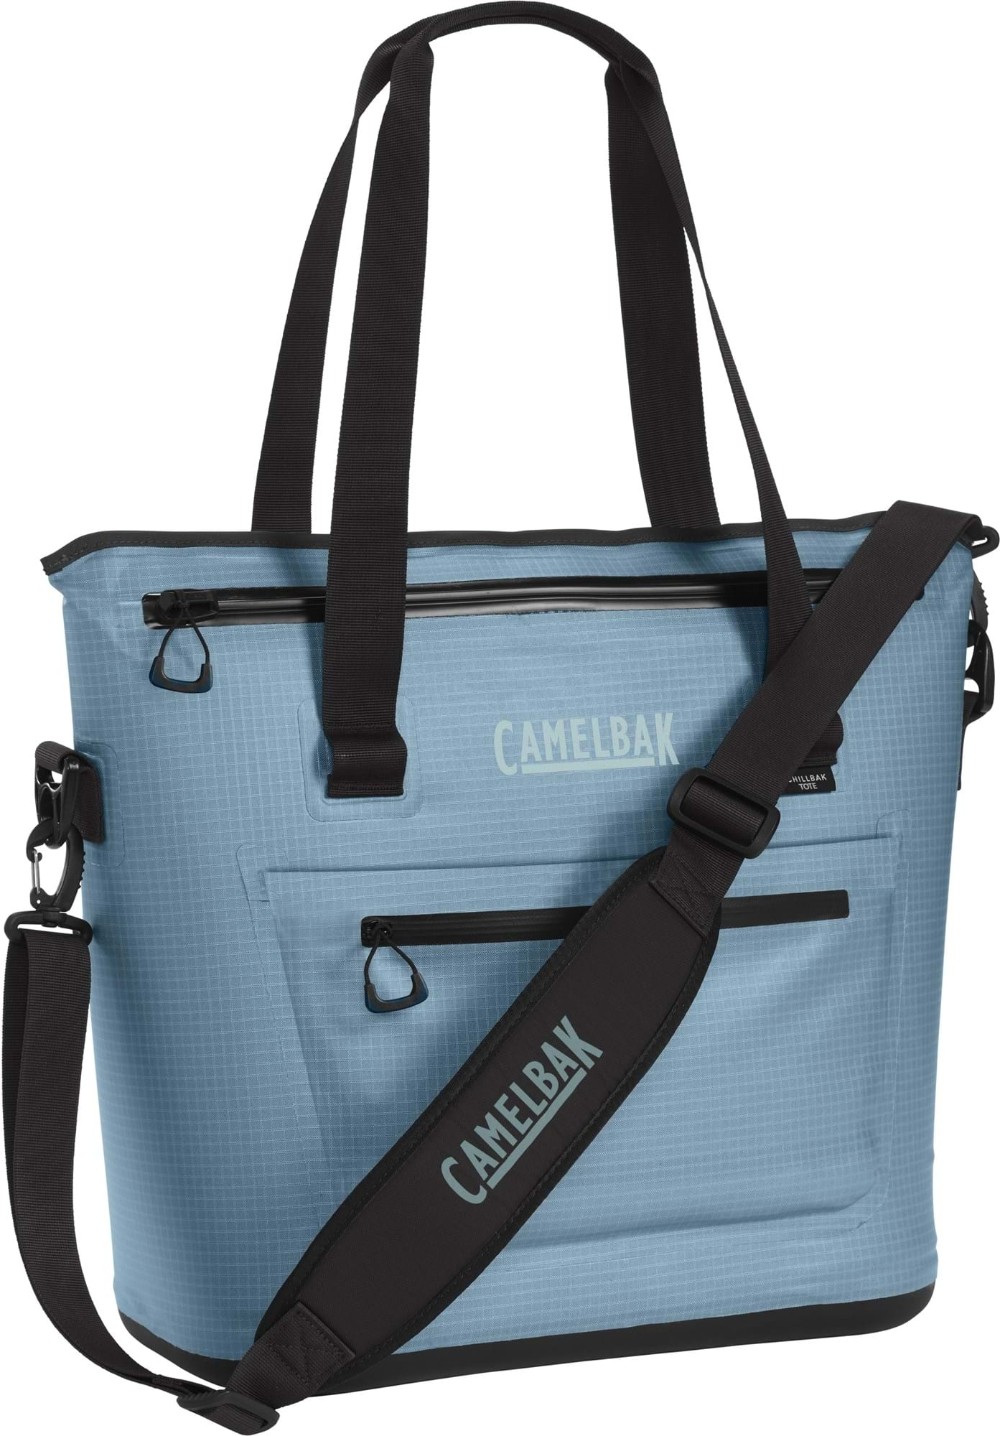 ChillBak Tote 18L Soft Cooler with 3L Fusion Group Reservoir image 2